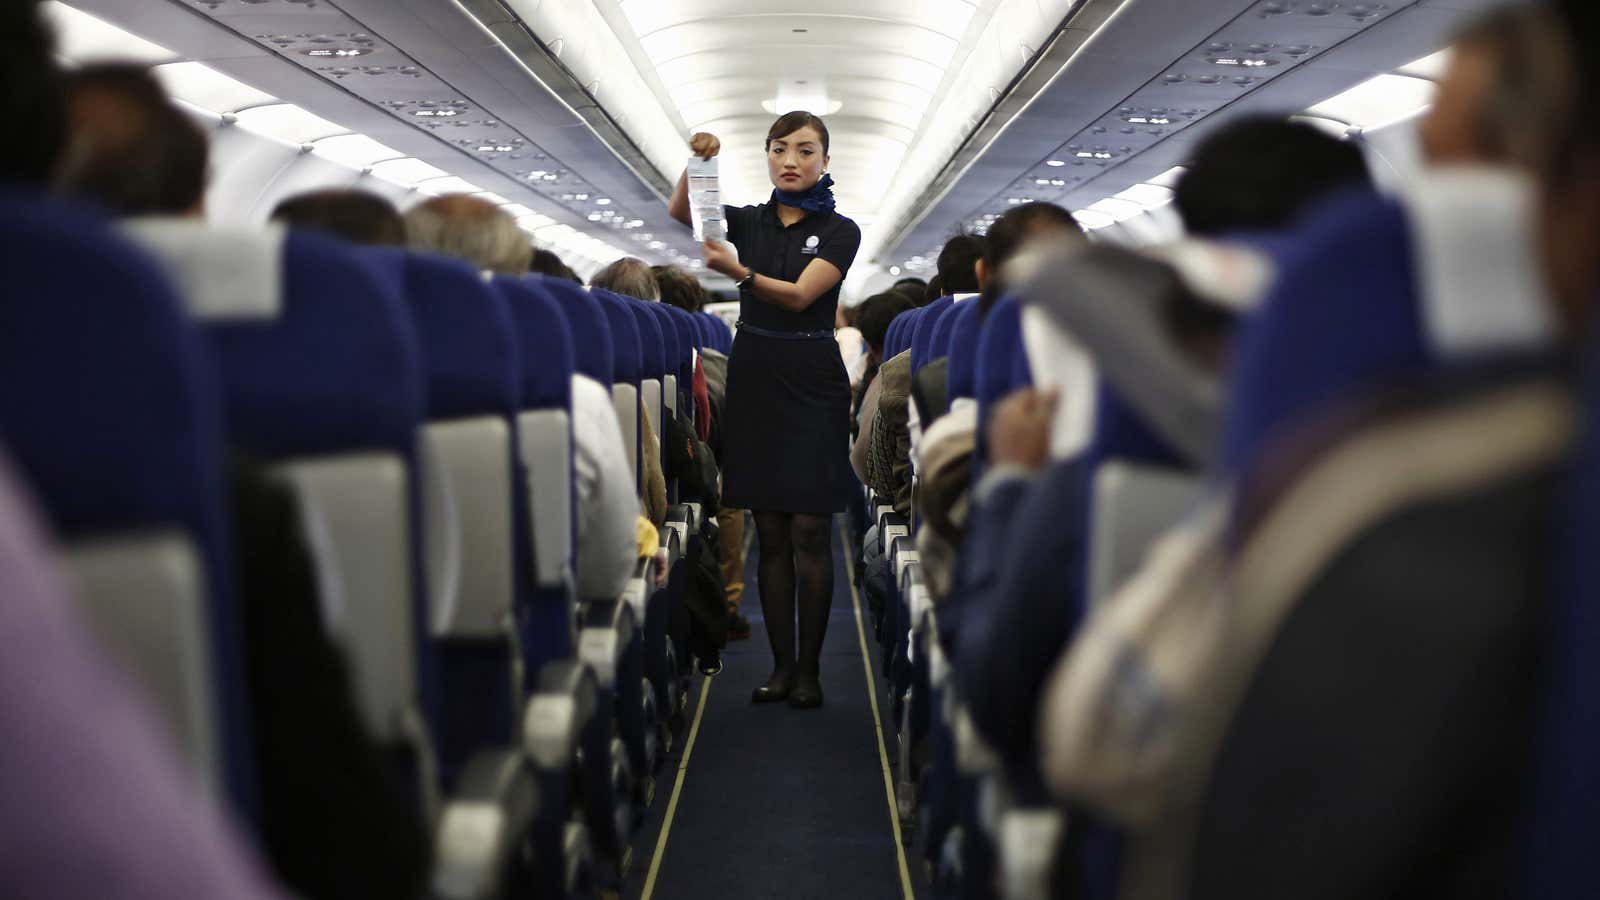 How does working with the largest Indian airline feels like?